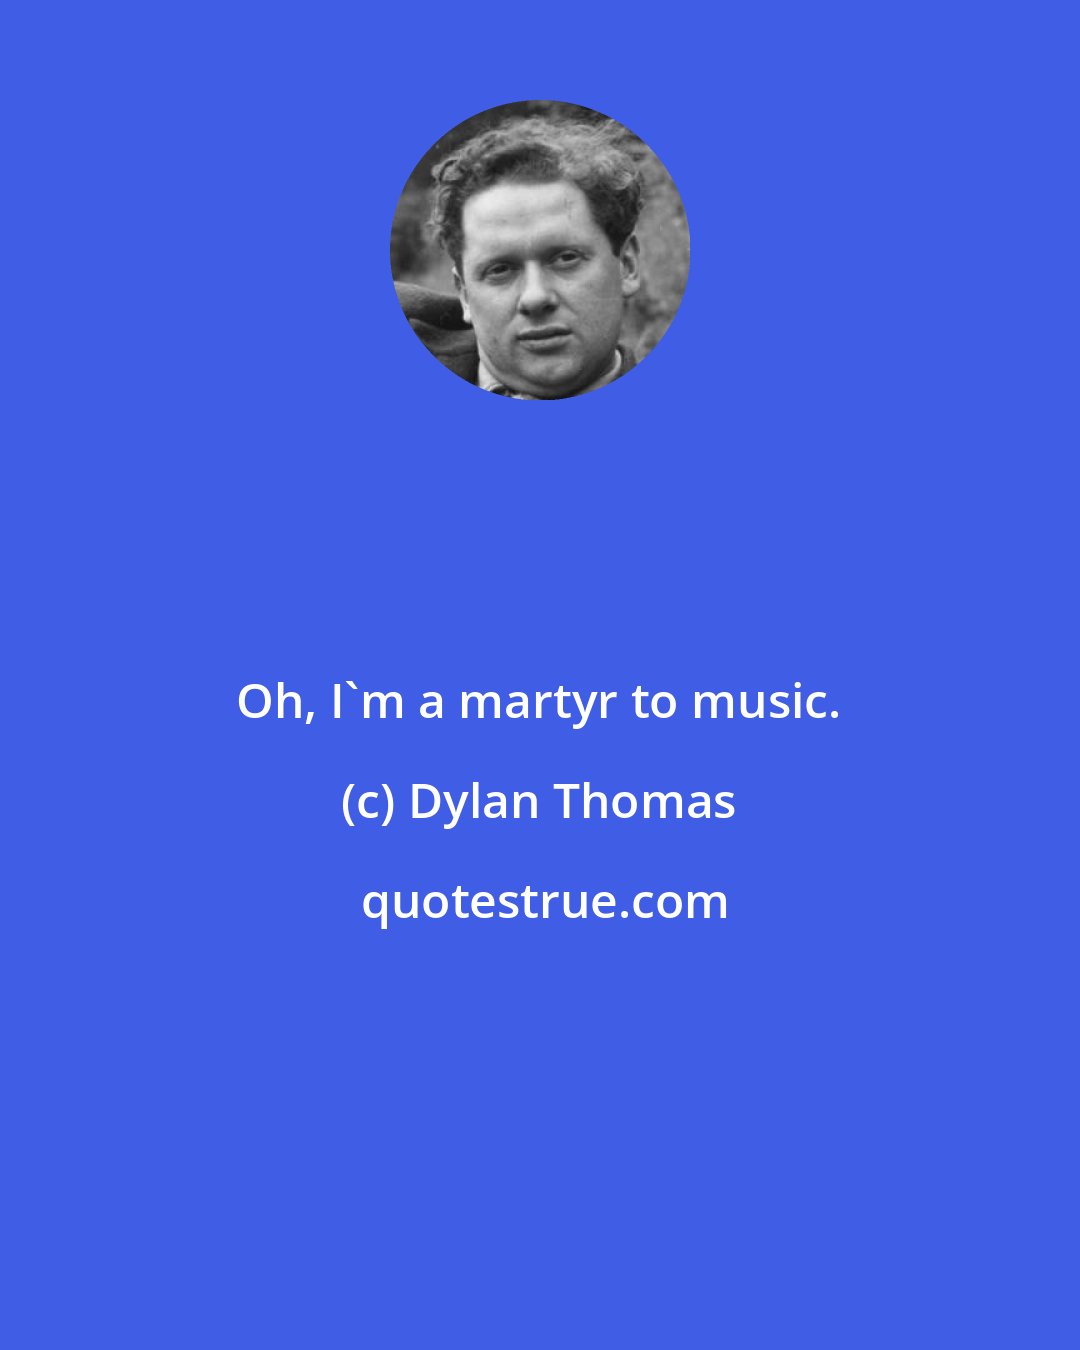 Dylan Thomas: Oh, I'm a martyr to music.